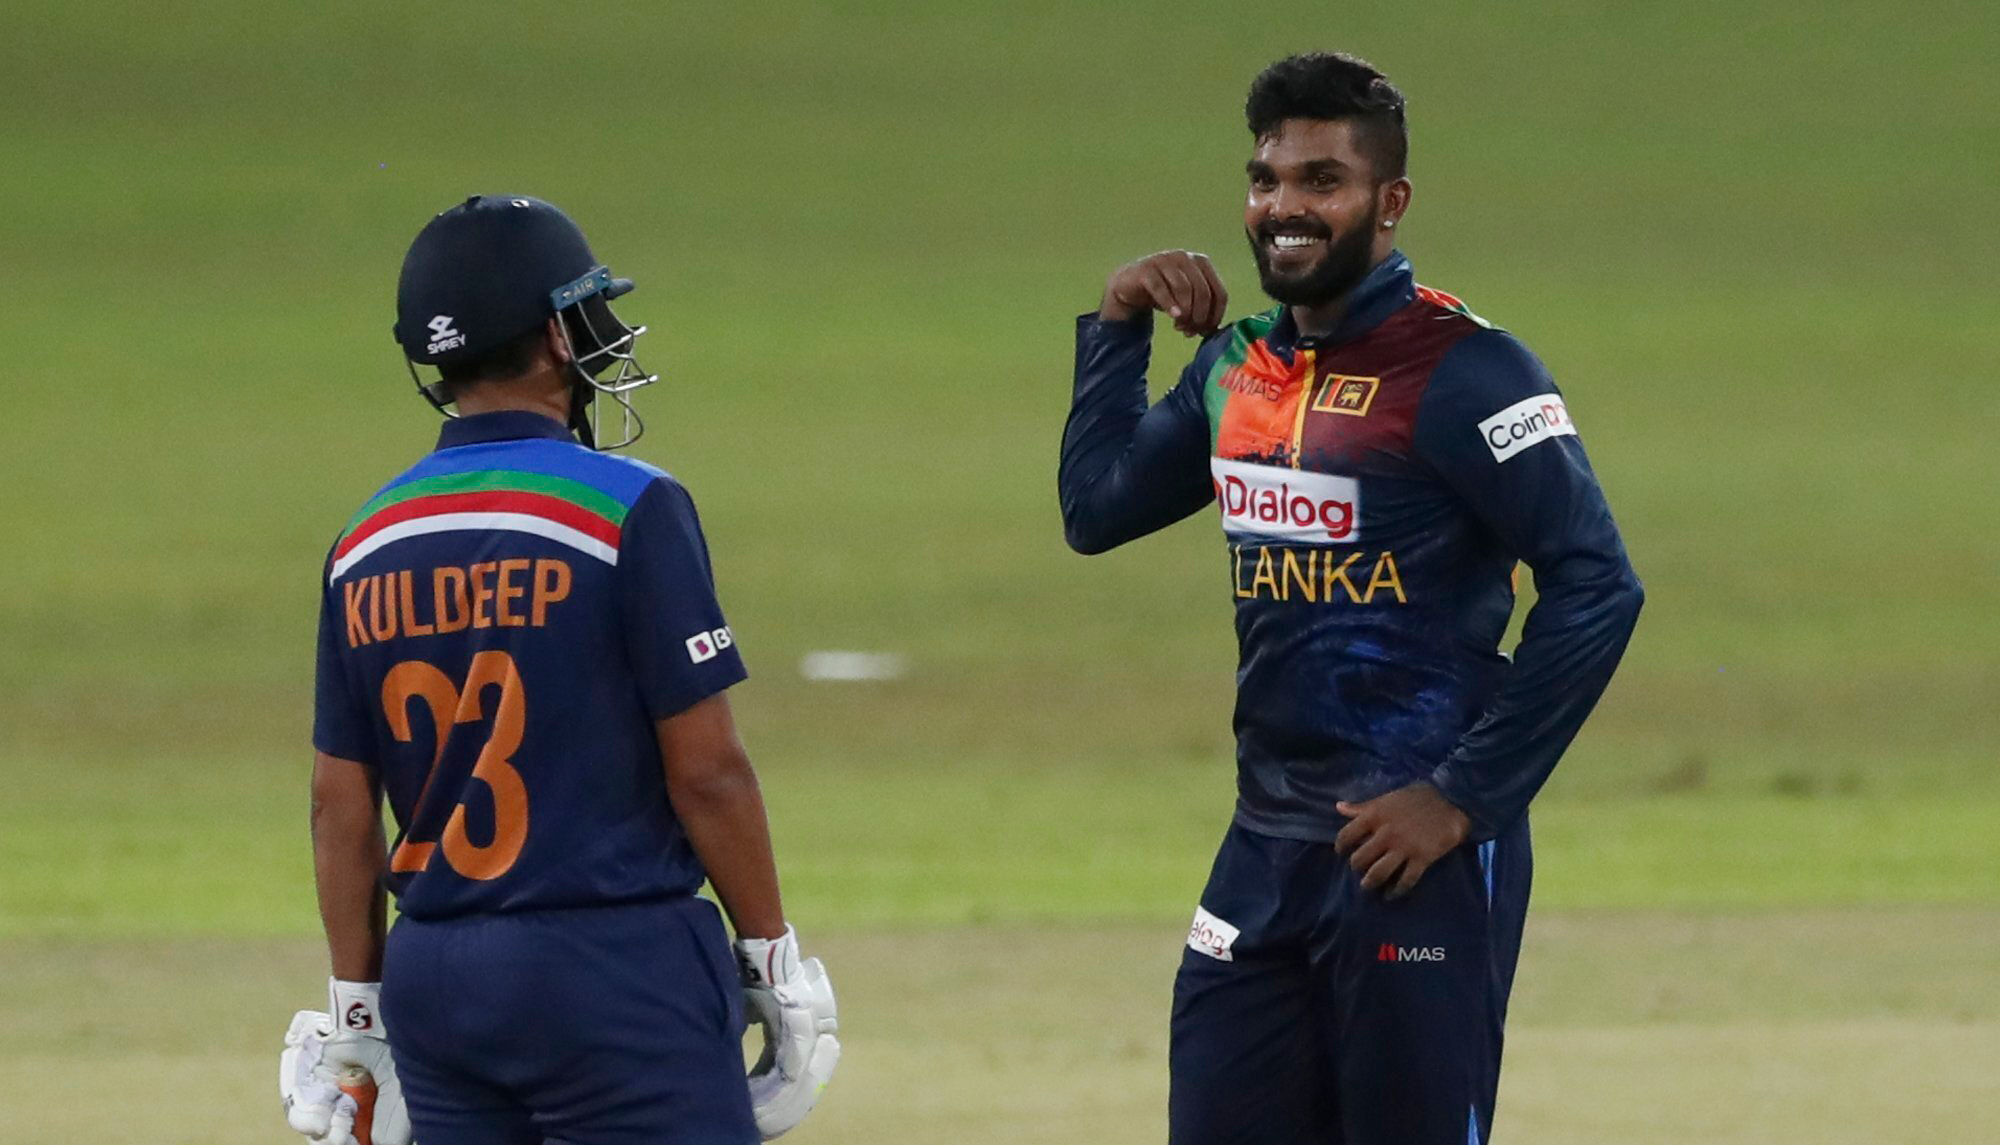 Sri Lanka beat India by 7 wickets in 3rd T20, win series 2-1